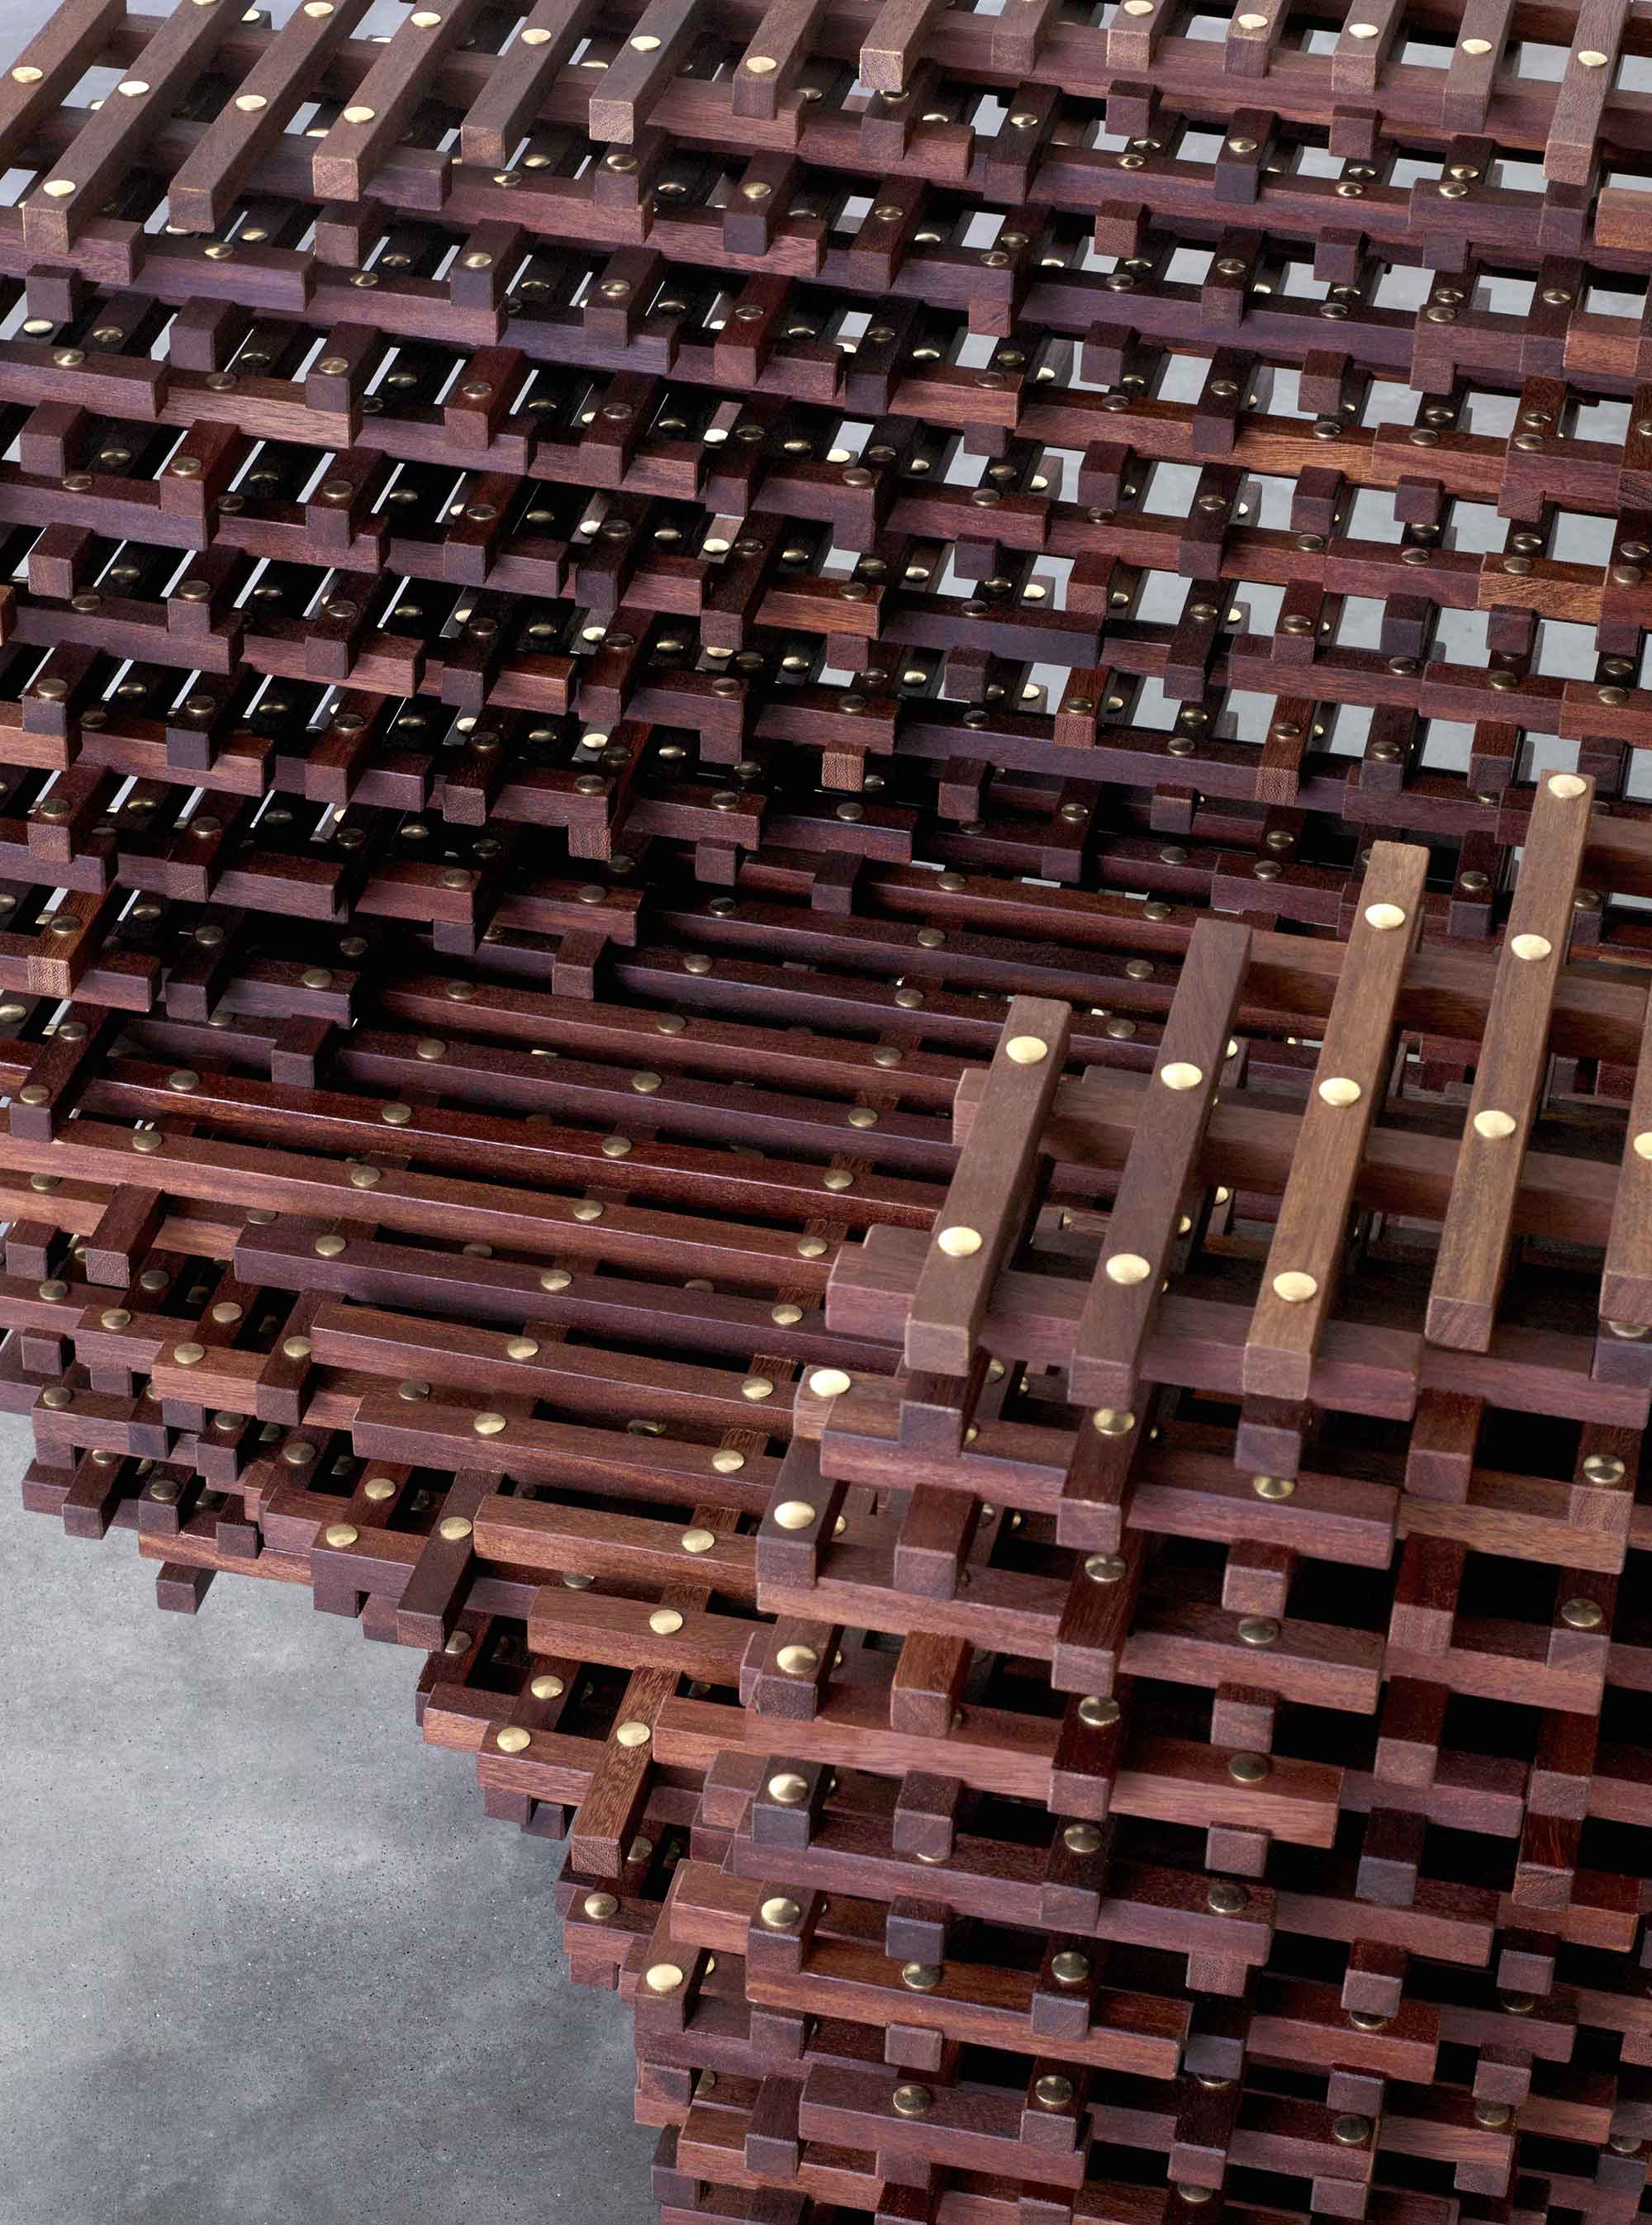 brodie-neill-transmutes-metals-ocean-plastic-and-reclaimed-timber-into-functional-objects